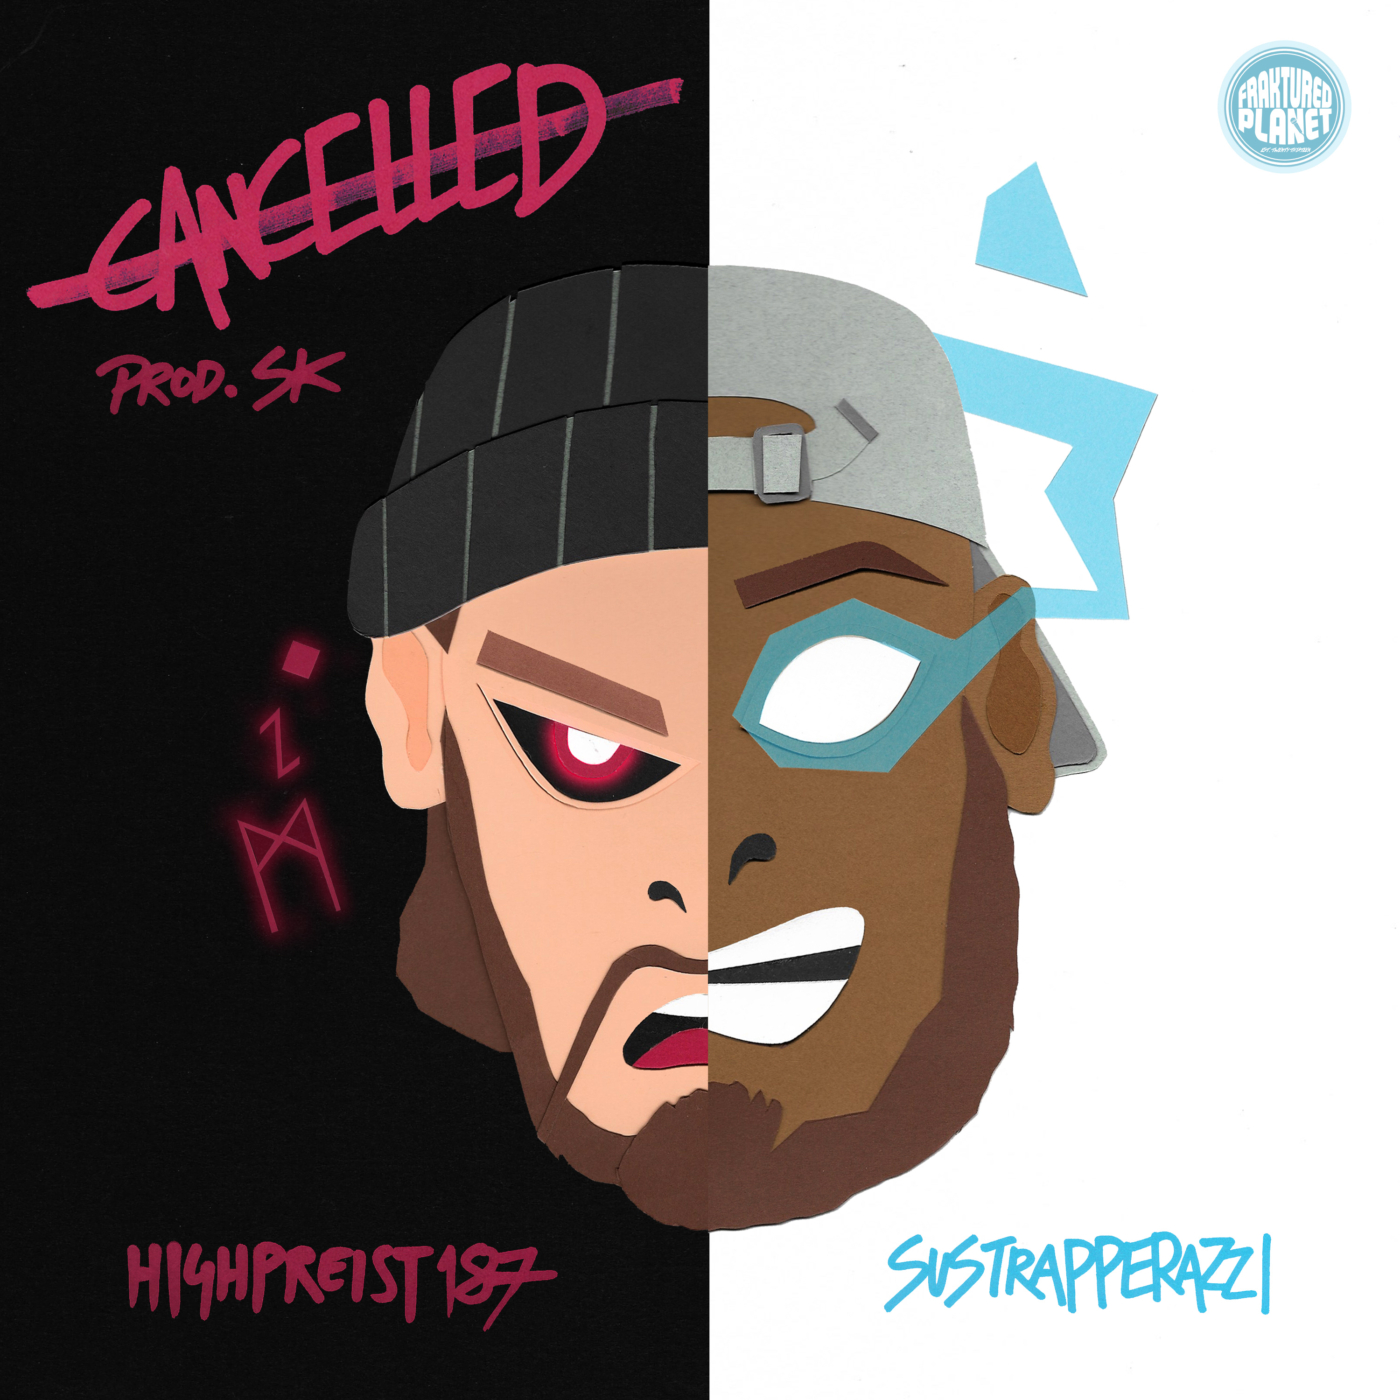 HighPriest187 - 'Cancelled' FT. Sustrapperazzi (Prod By. SK)